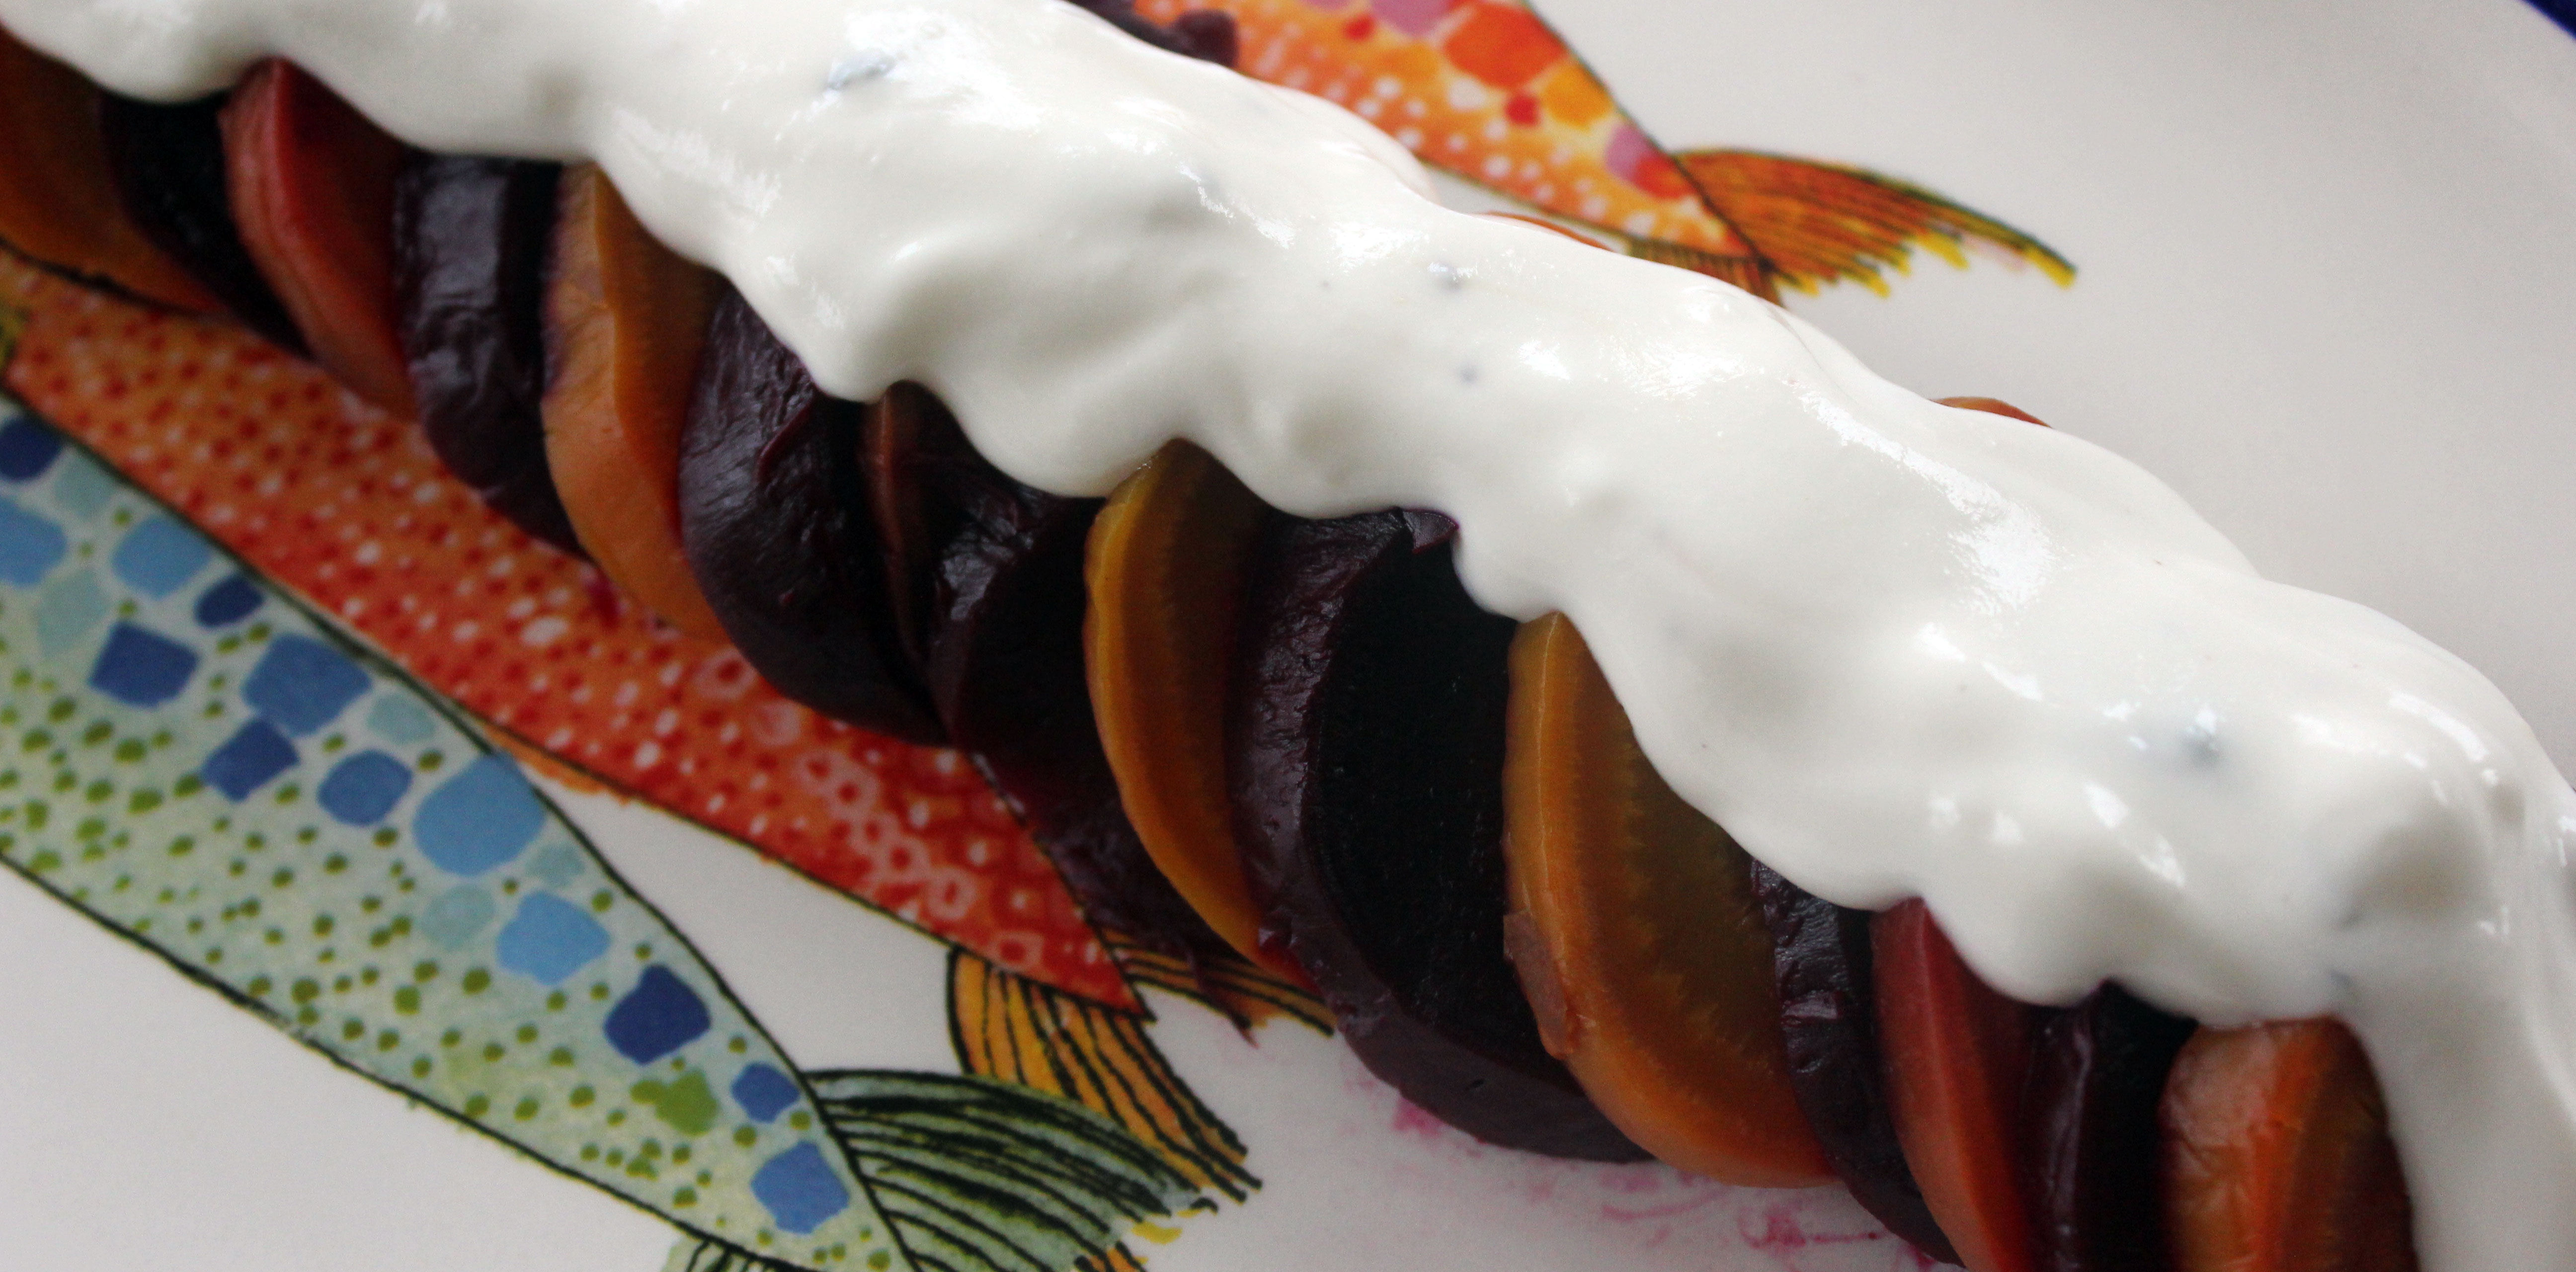 TBT Recipe: Smoked Beets with Charred Pecans and Buttermilk-Goat Cheese Crema